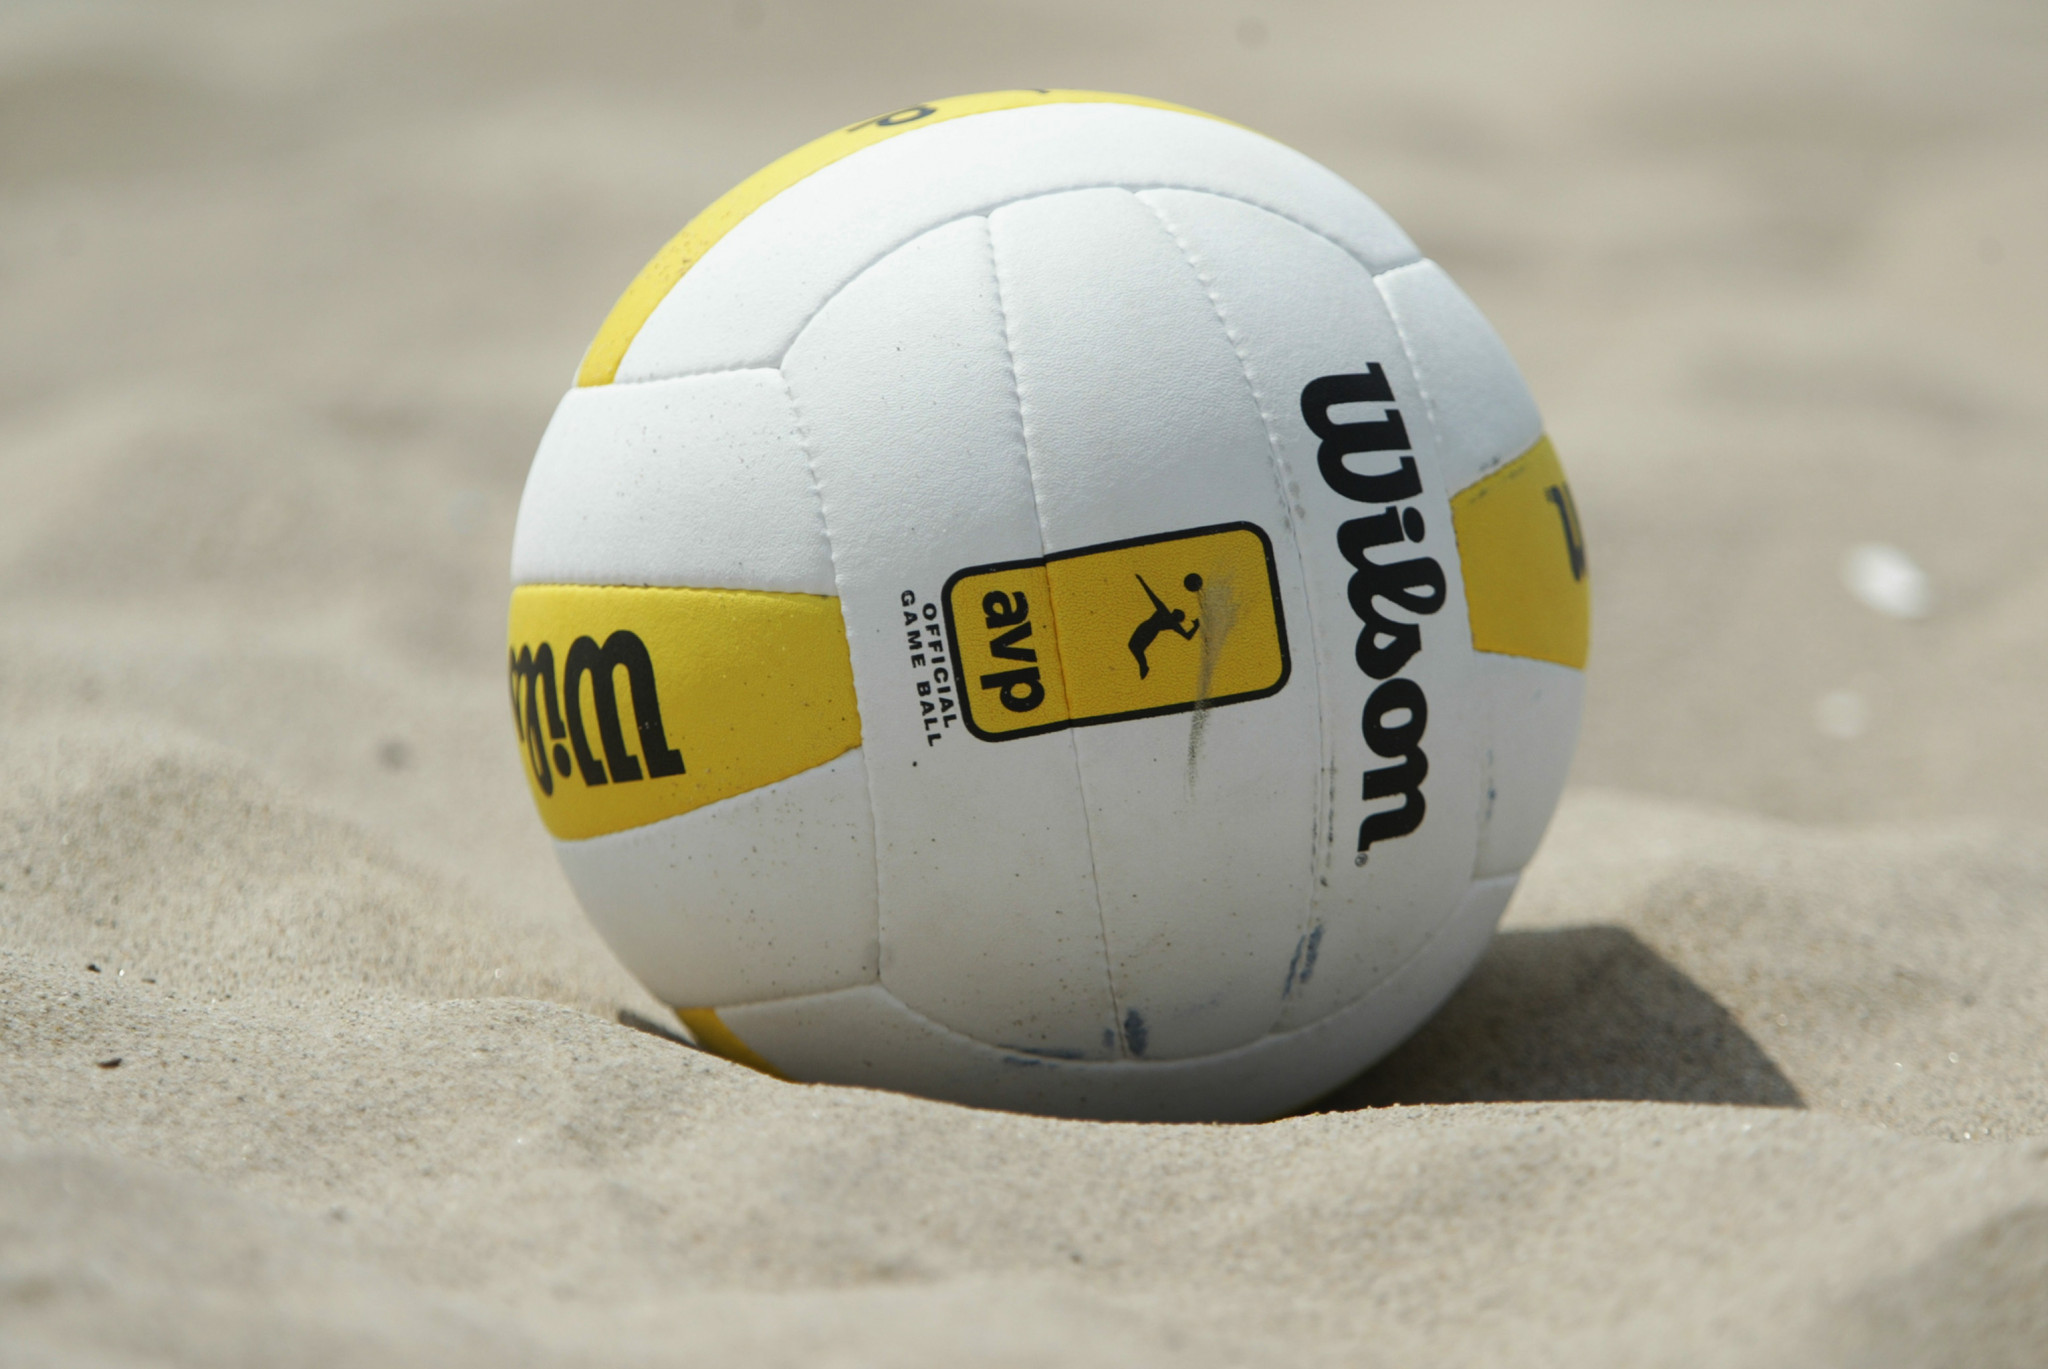 Four teams progress through qualifiers to reach main draw of Doha Beach Volleyball Cup